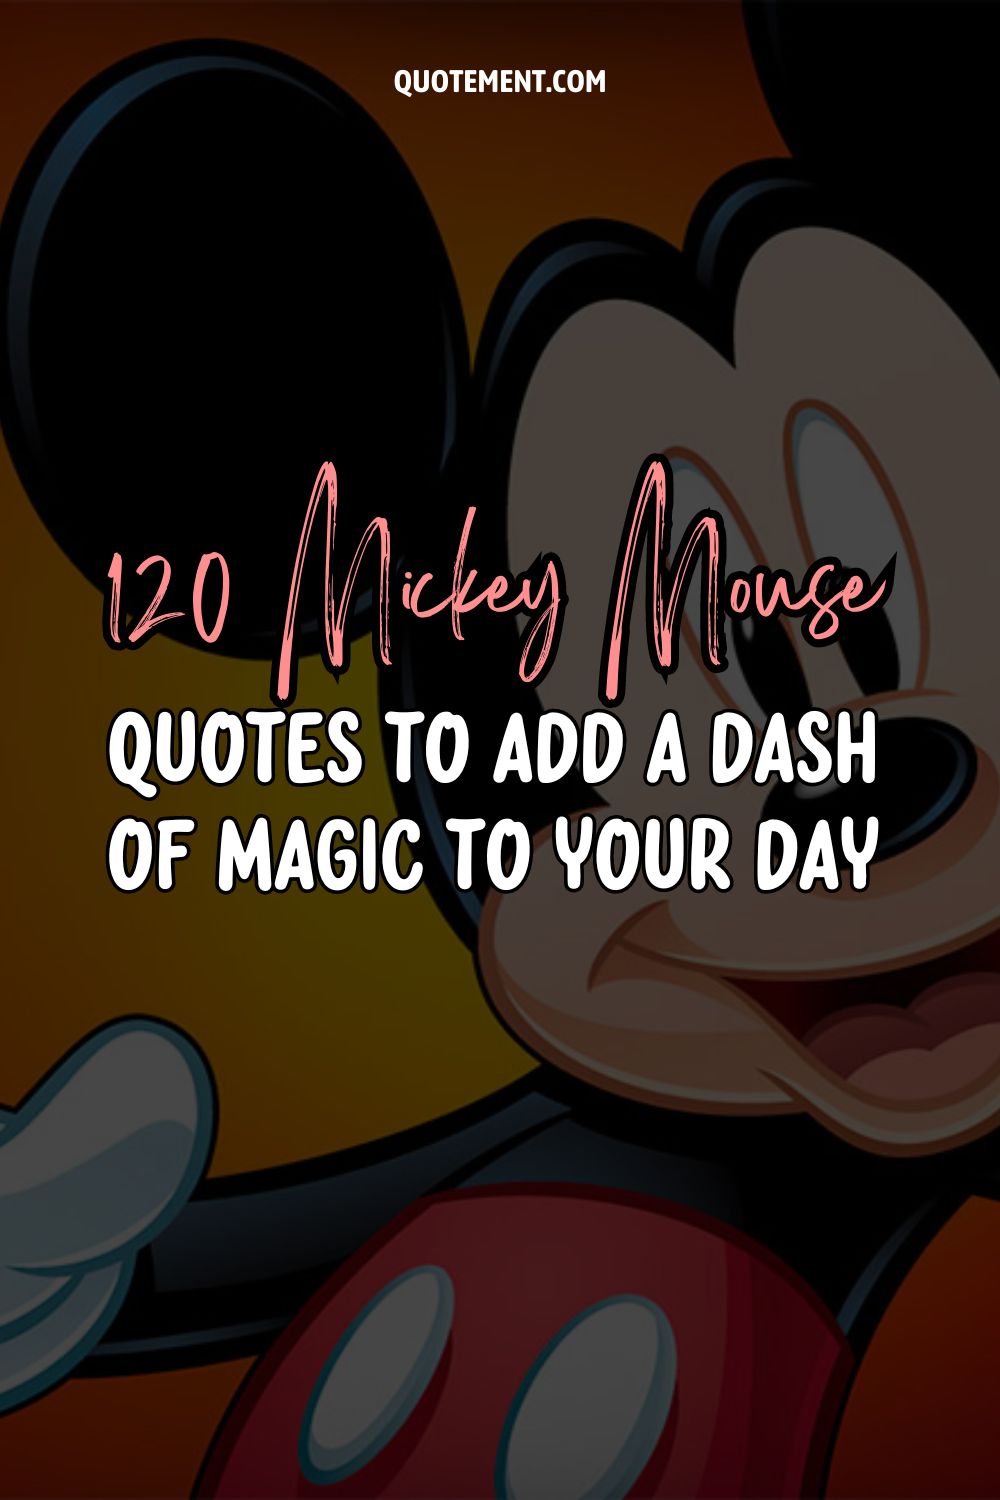 120 Mickey Mouse Quotes To Add A Dash of Magic To Your Day
